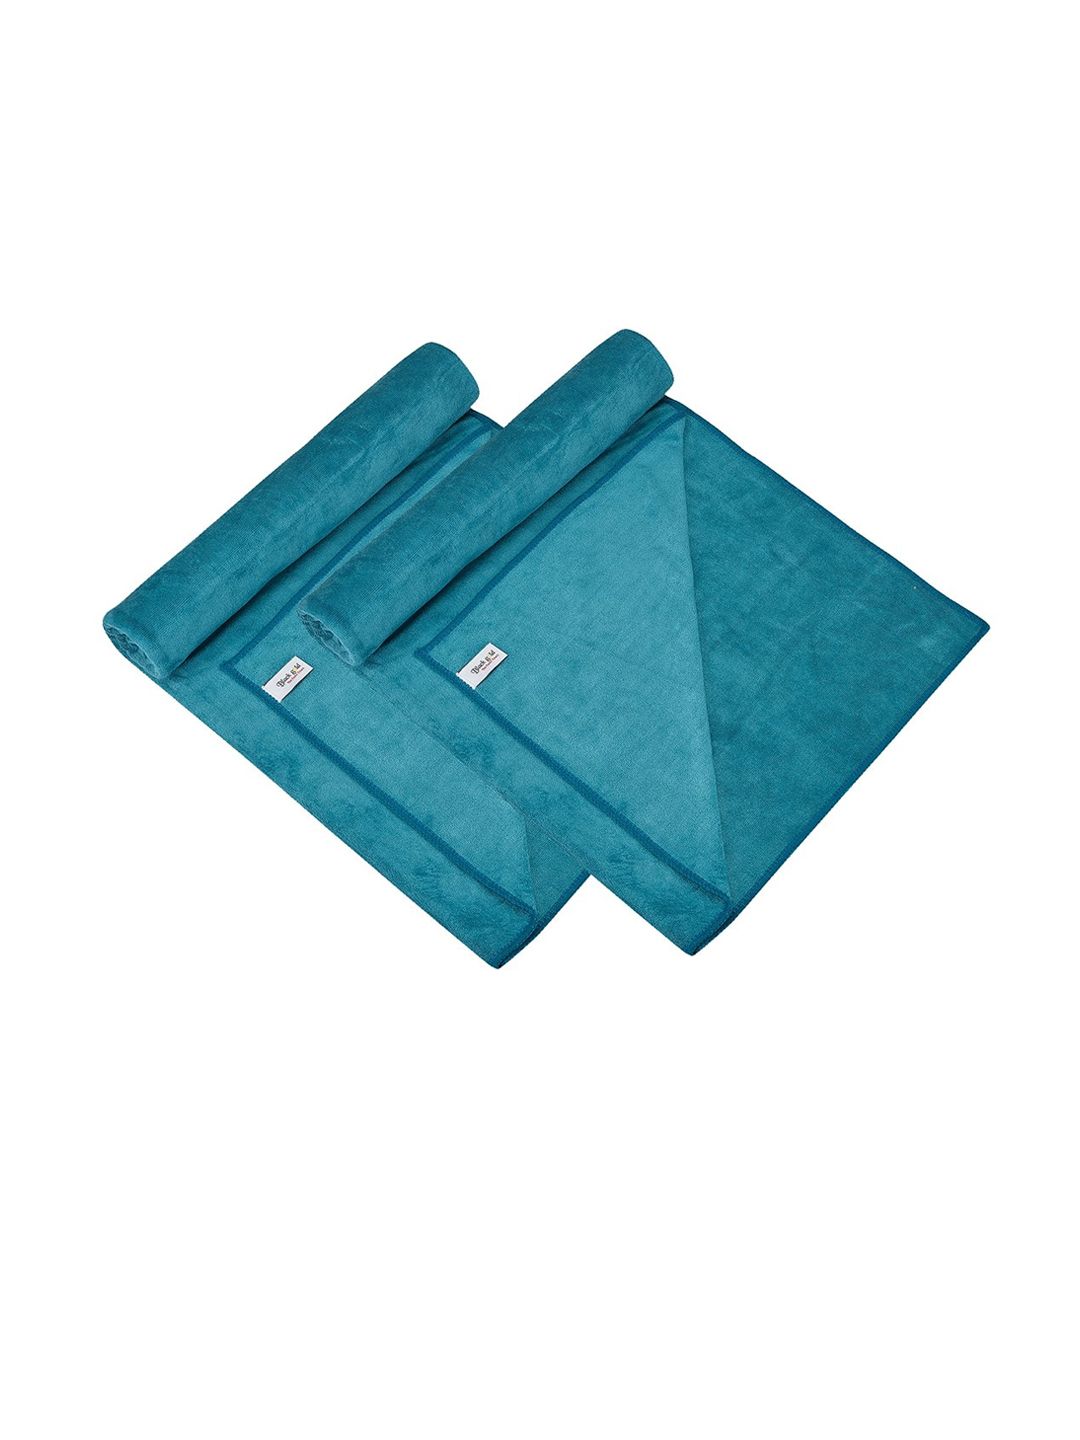 Black gold Set Of 2 Peacock Green Solid 400 GSM Bath Towels Price in India